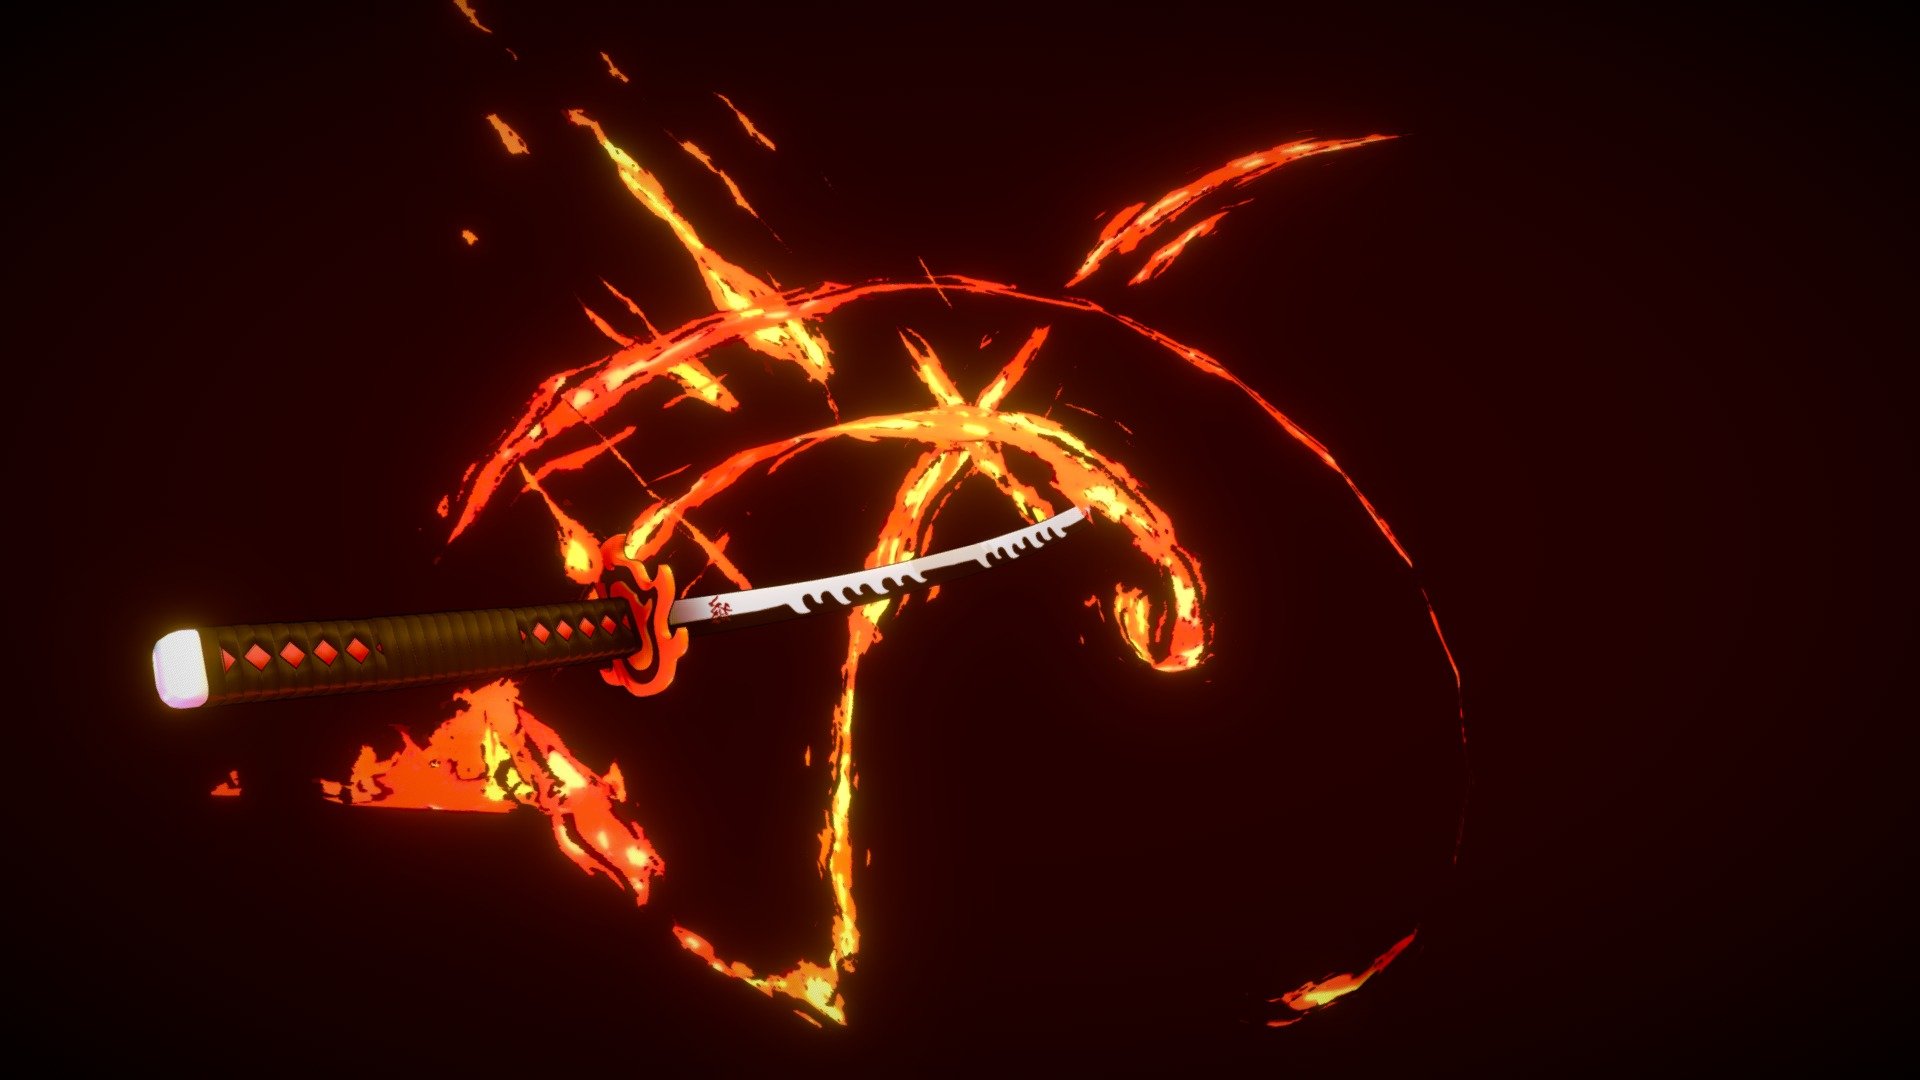 A while ago I started the anime of Demon Slayer, because of the incredible visual effects I thought about how I could recreate one of those moments with the swords, so I chose to make the new sword of the protagonist Tanjiro, and recreate one of those incredible effects of the anime I hope you like it 3d model